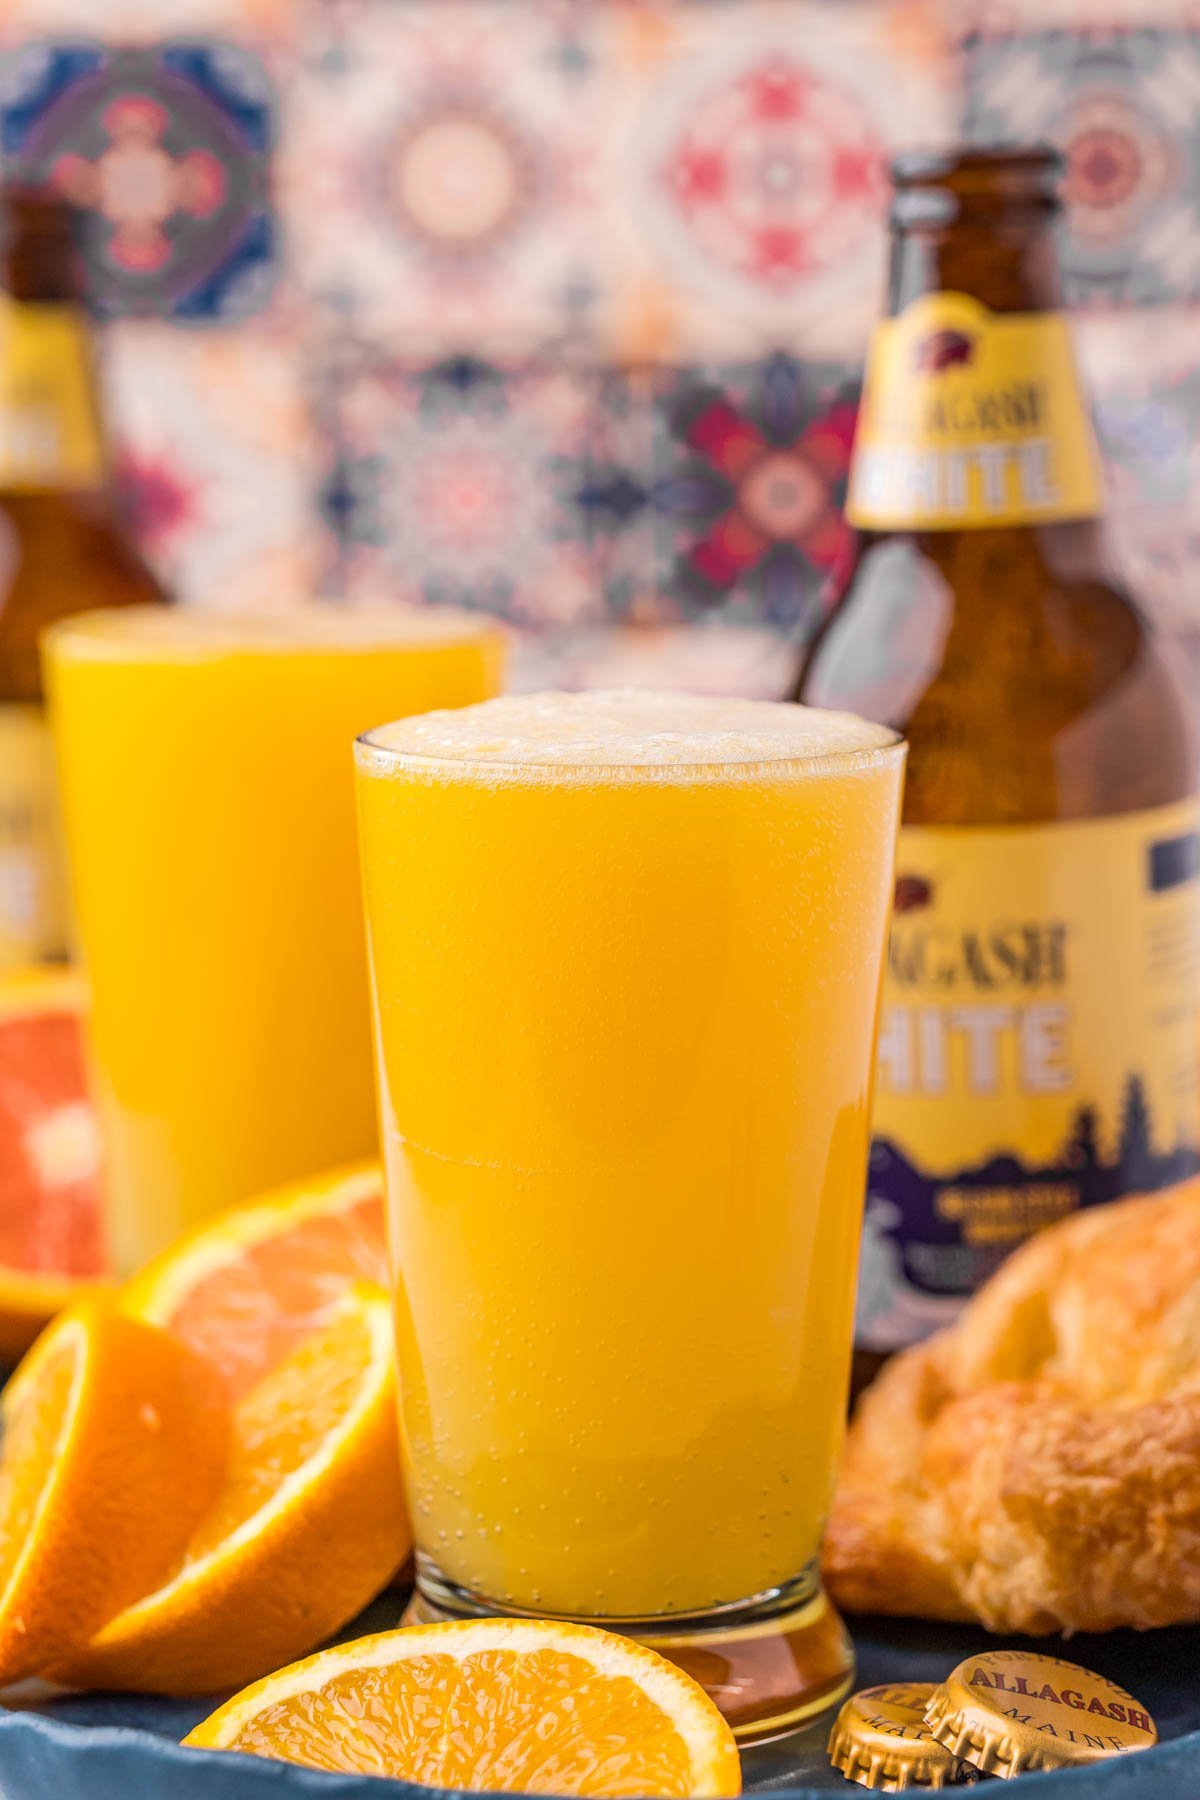 Straight on photo of a beermosa with a bottle of Allagash White in the background.